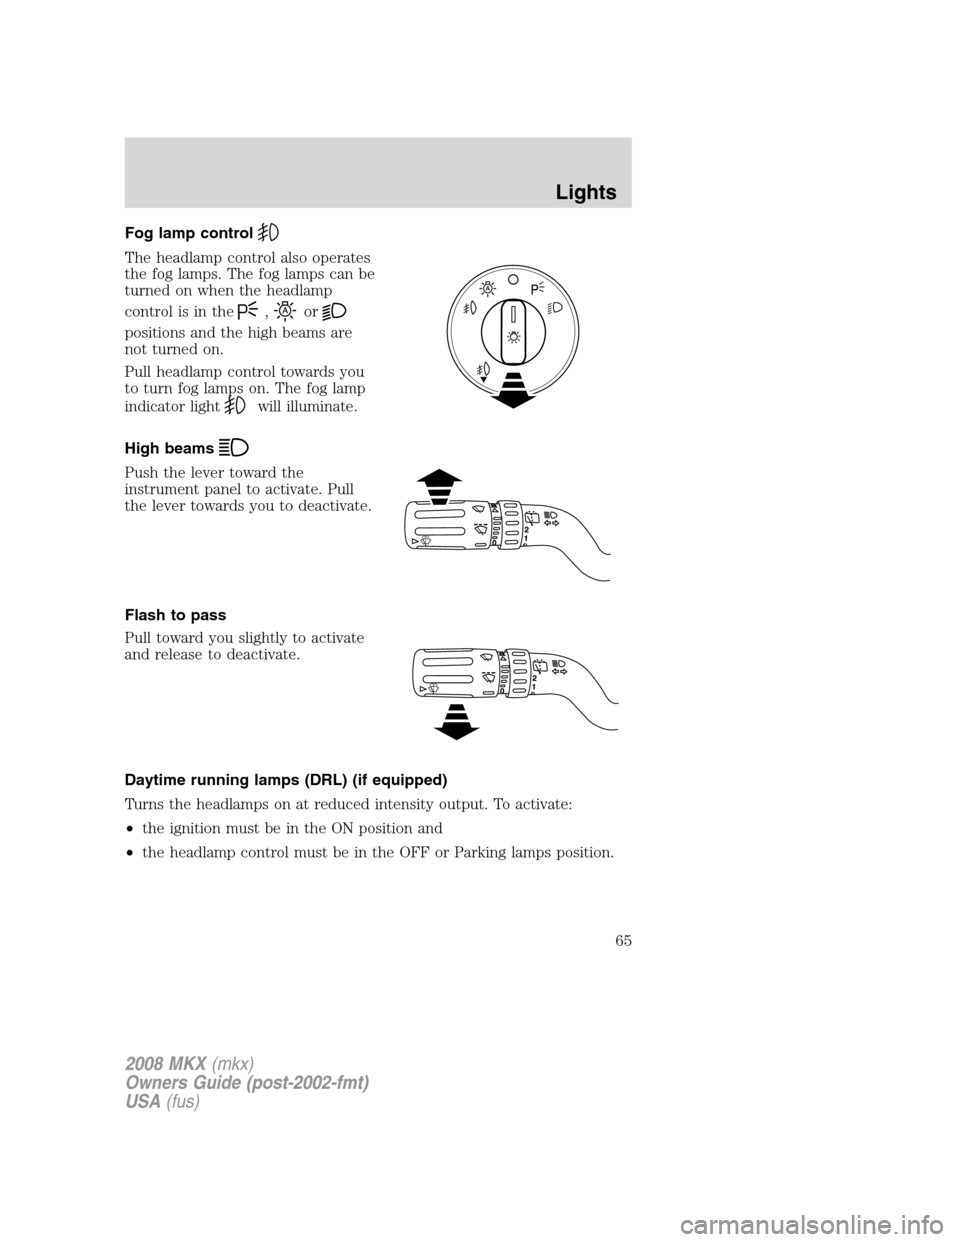 LINCOLN MKX 2008  Owners Manual Fog lamp control
The headlamp control also operates
the fog lamps. The fog lamps can be
turned on when the headlamp
control is in the
,or
positions and the high beams are
not turned on.
Pull headlamp 